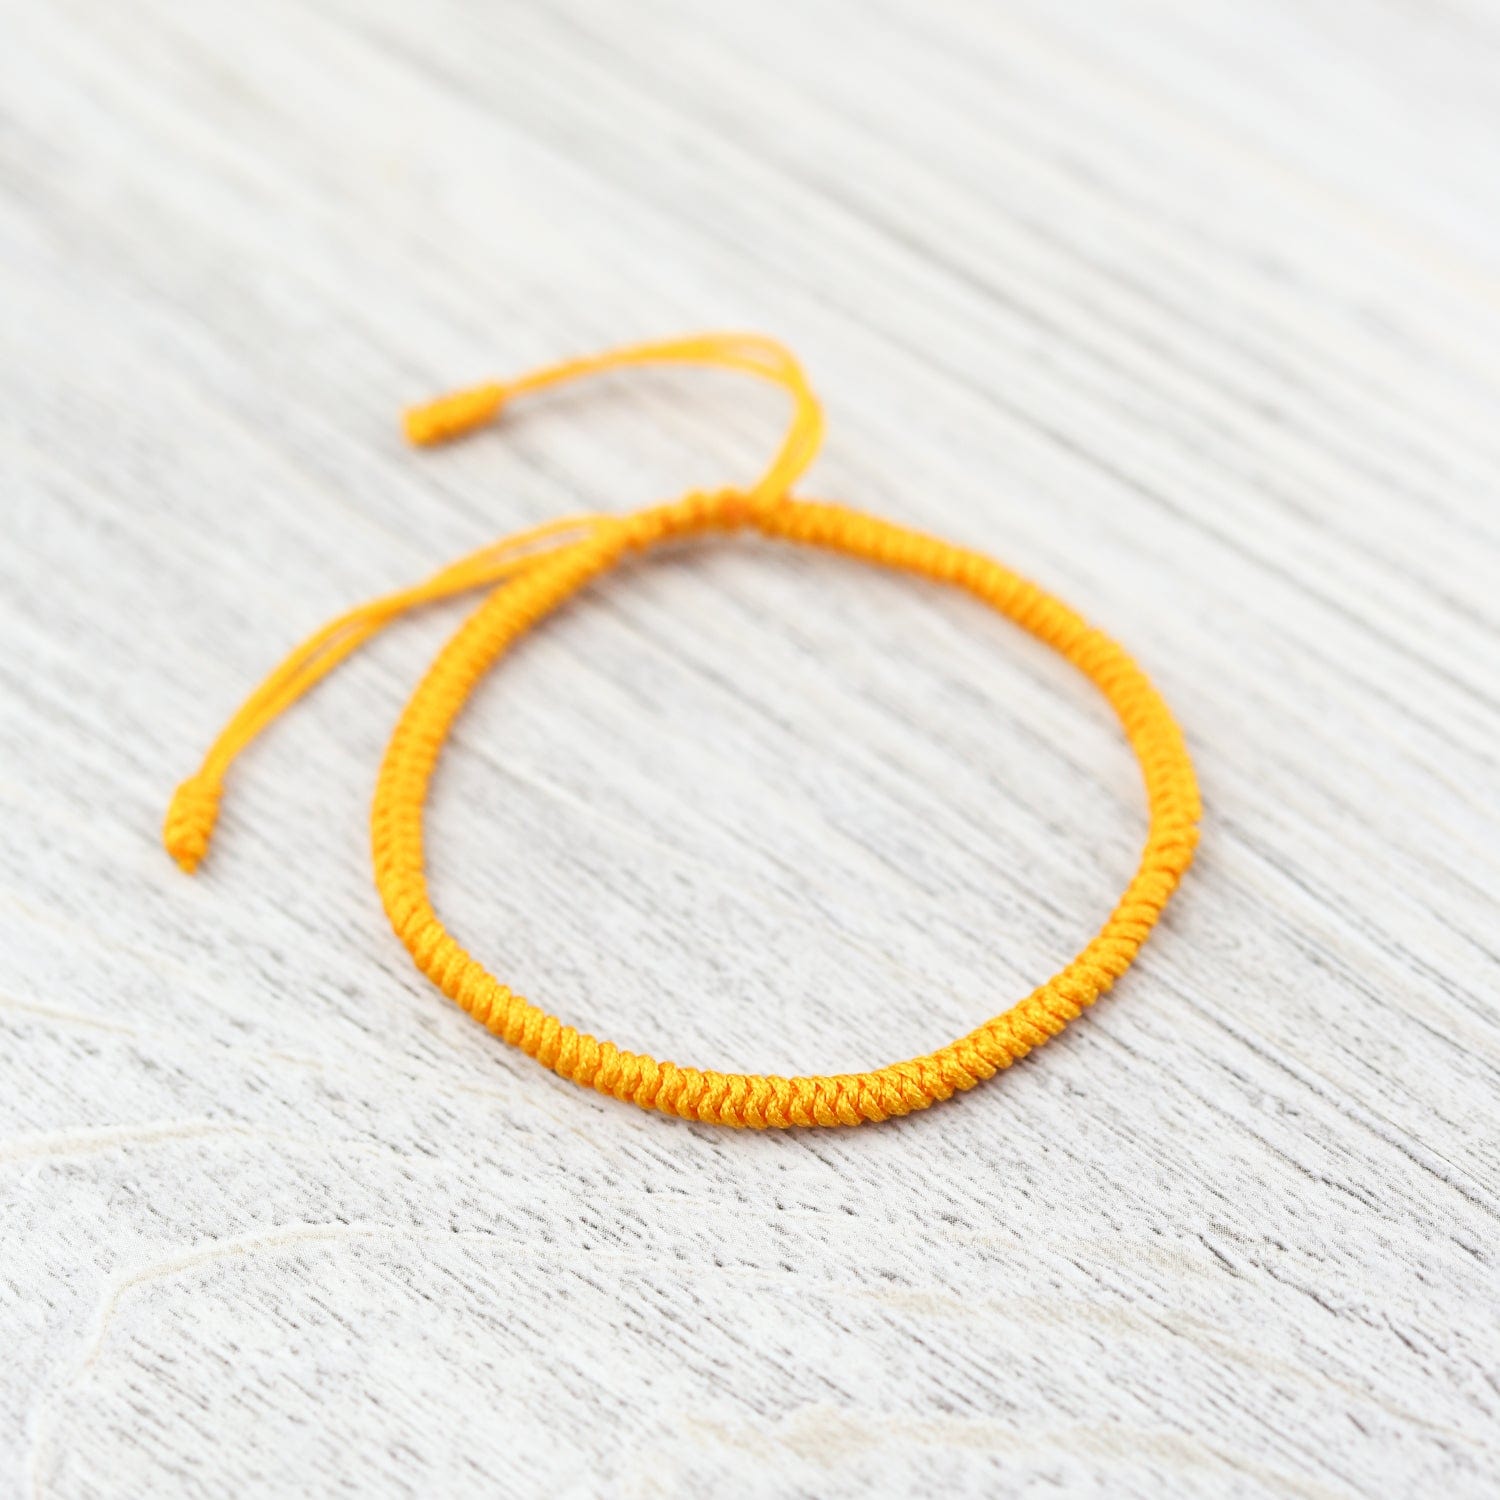 Tibetan Traditions Yellow Knotted Bracelet